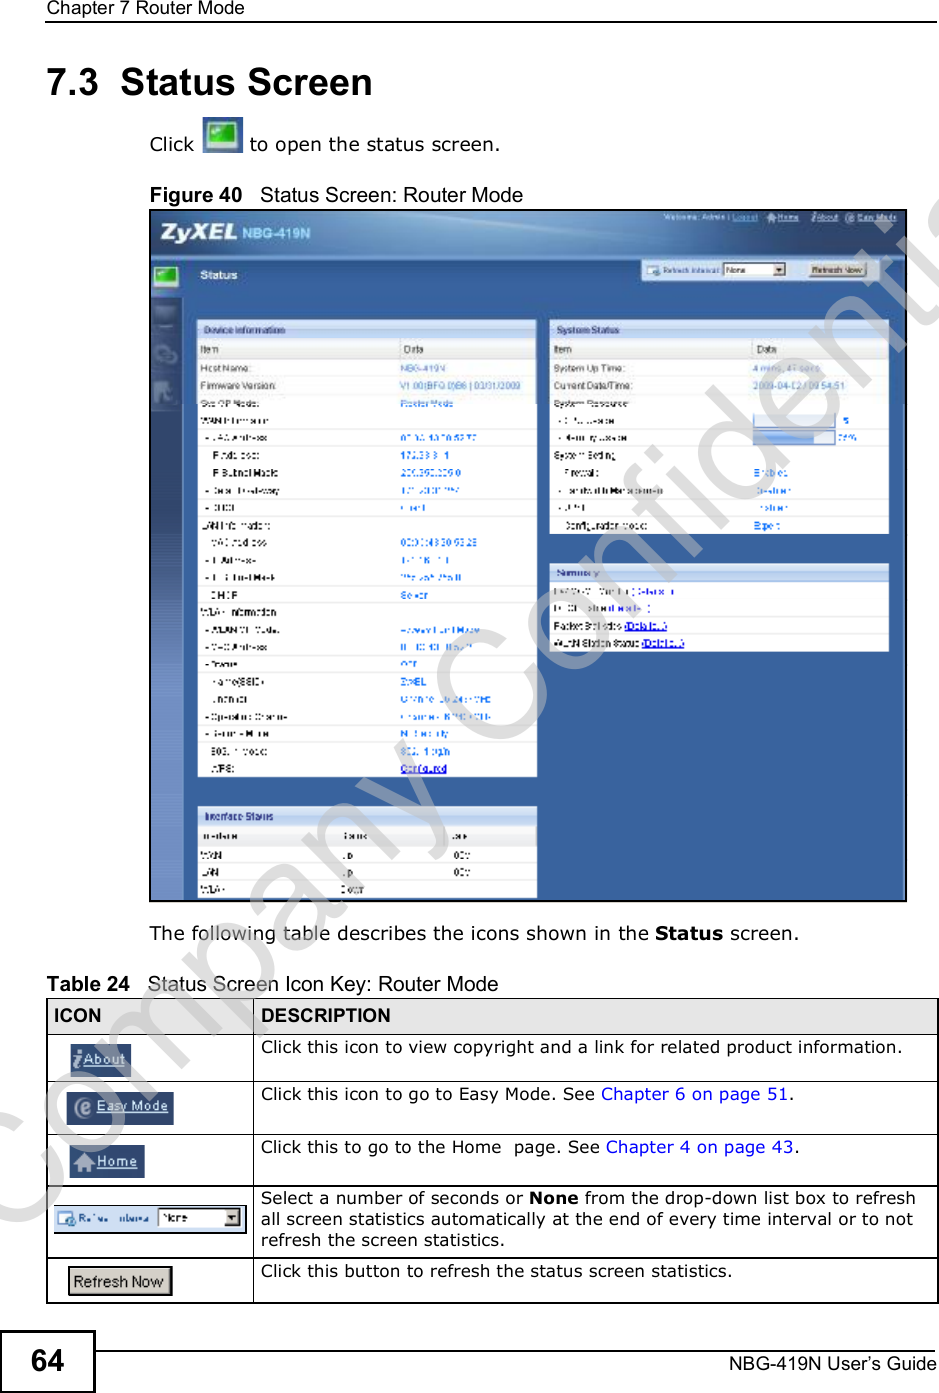 Chapter 7Router ModeNBG-419N User s Guide647.3  Status ScreenClick  to open the status screen. Figure 40   Status Screen: Router Mode The following table describes the icons shown in the Status screen.Table 24   Status Screen Icon Key: Router Mode ICON DESCRIPTIONClick this icon to view copyright and a link for related product information.Click this icon to go to Easy Mode. See Chapter 6 on page 51.Click this to go to the Home  page. See Chapter 4 on page 43.Select a number of seconds or None from the drop-down list box to refresh all screen statistics automatically at the end of every time interval or to not refresh the screen statistics.Click this button to refresh the status screen statistics.Company Confidential